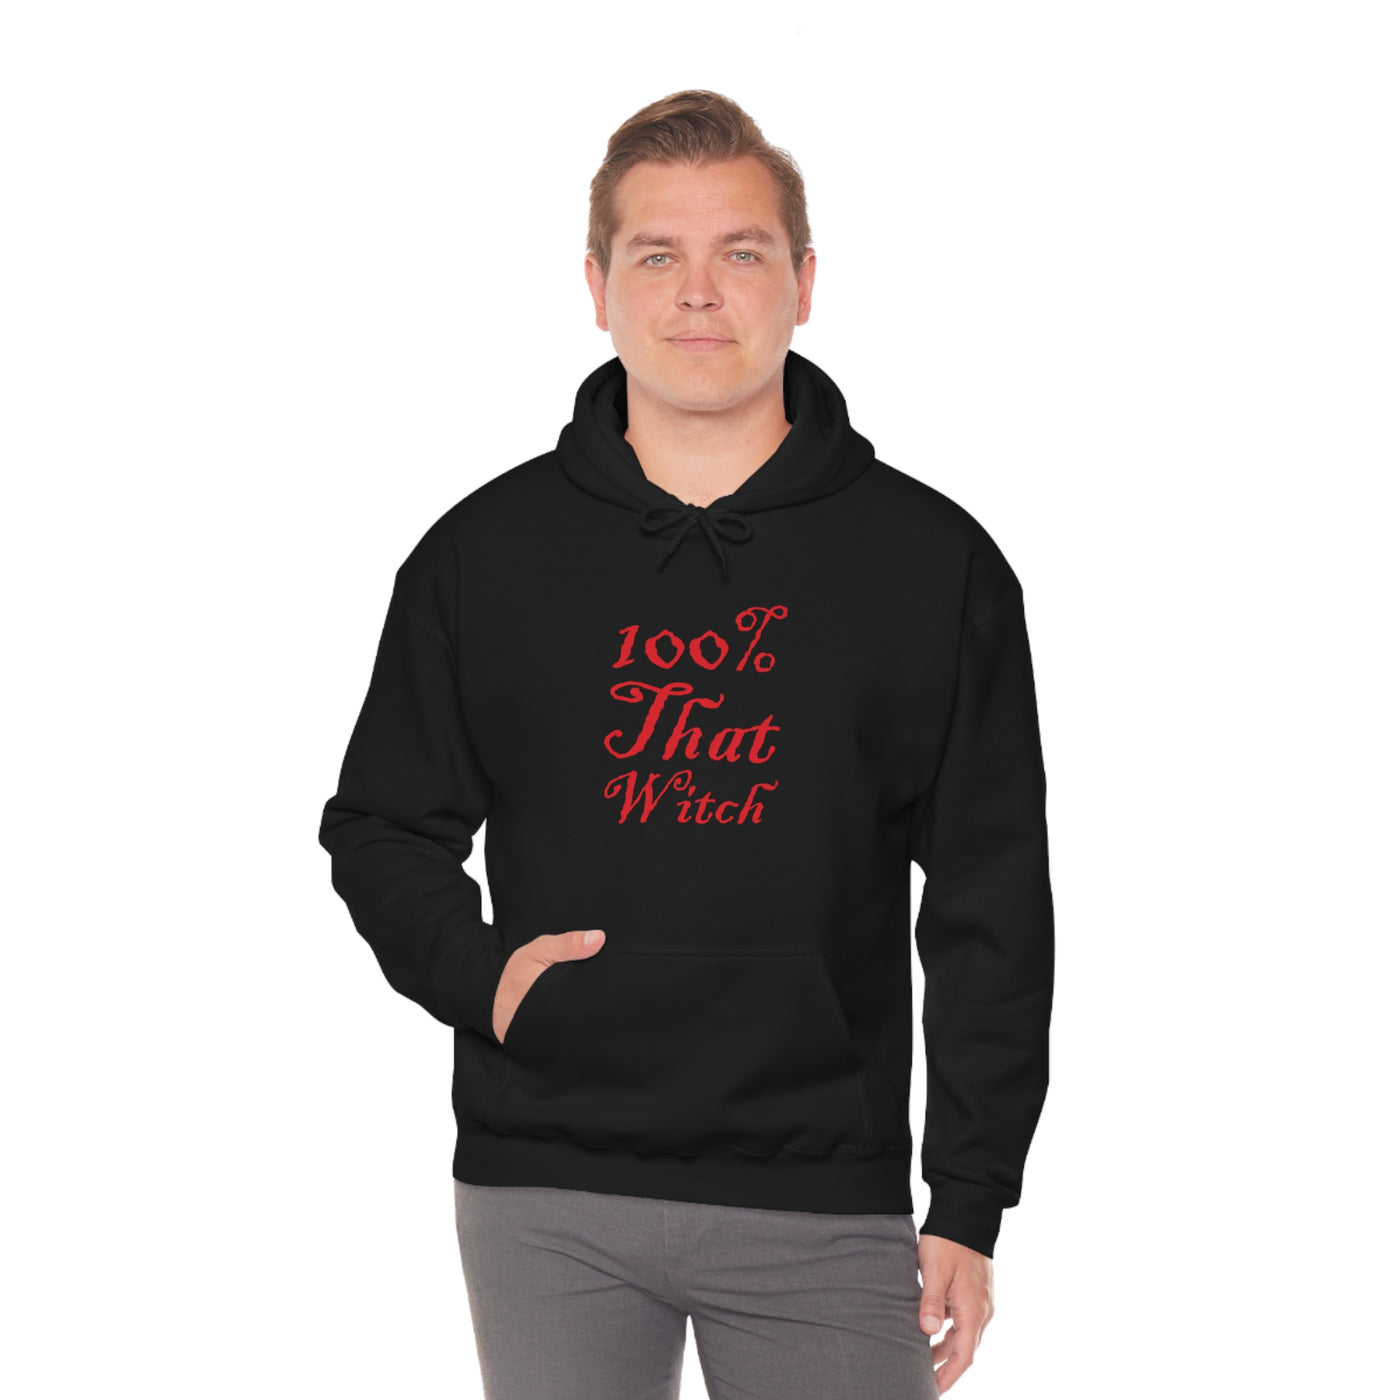 100% That Witch Unisex Hoodie